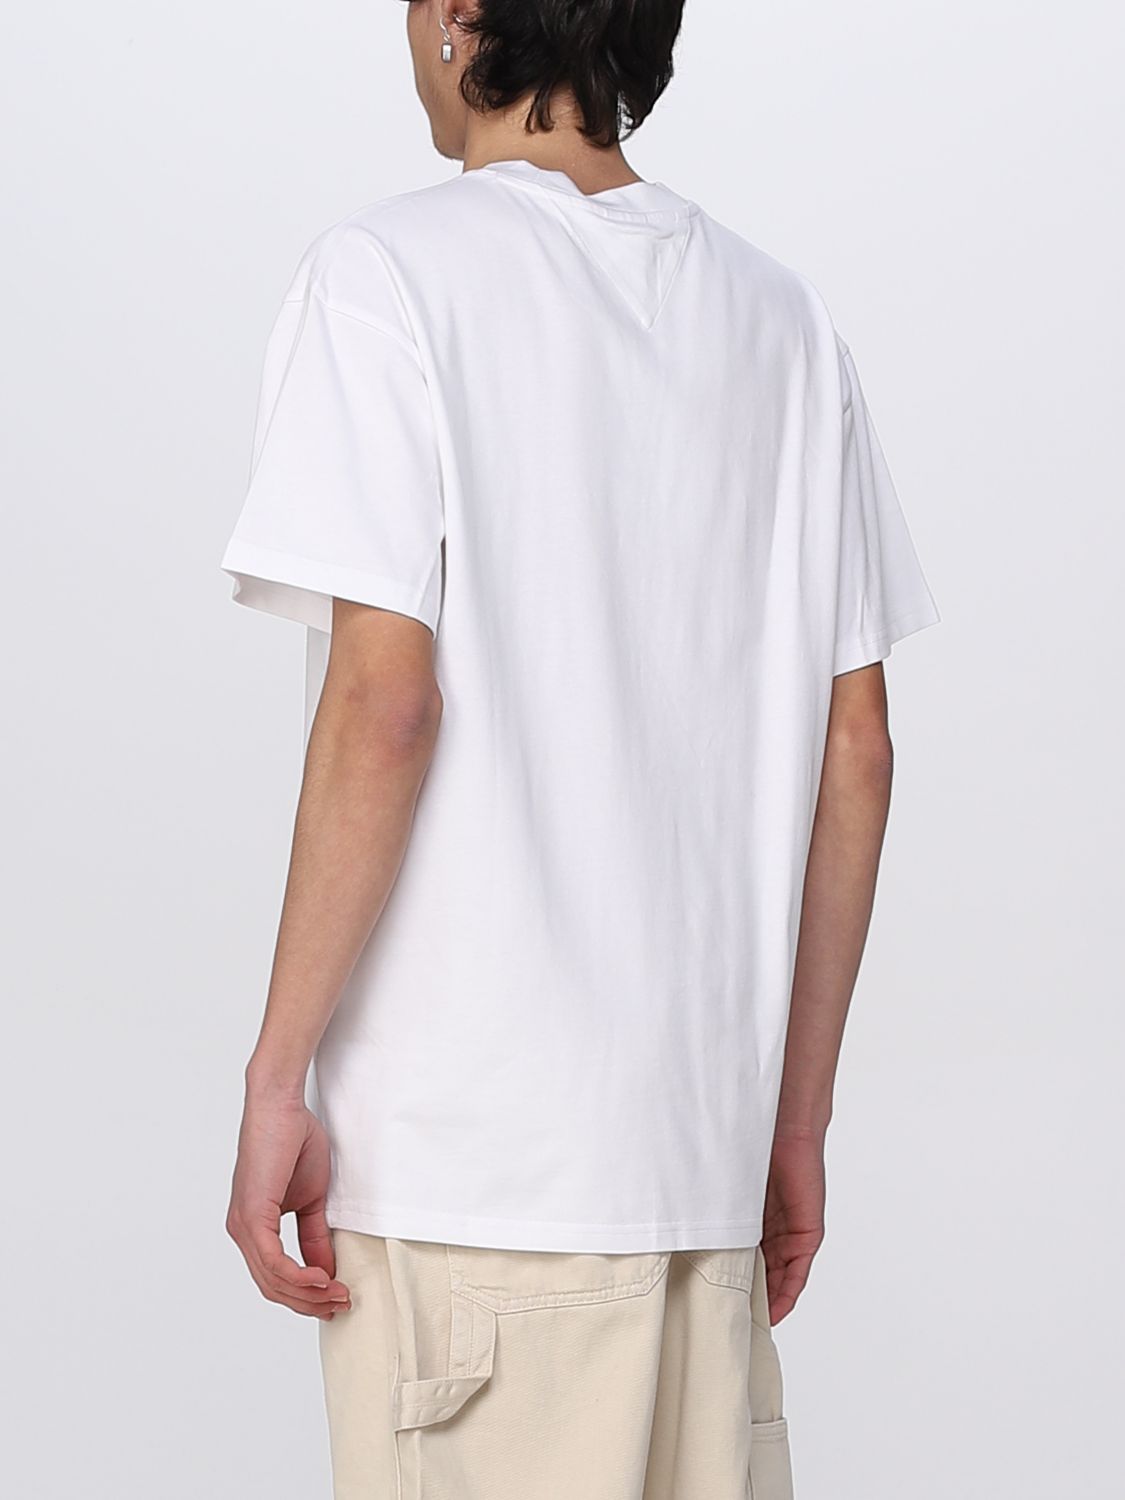 TOMMY JEANS: t-shirt for man - White | Tommy Jeans t-shirt DM0DM16231 ...